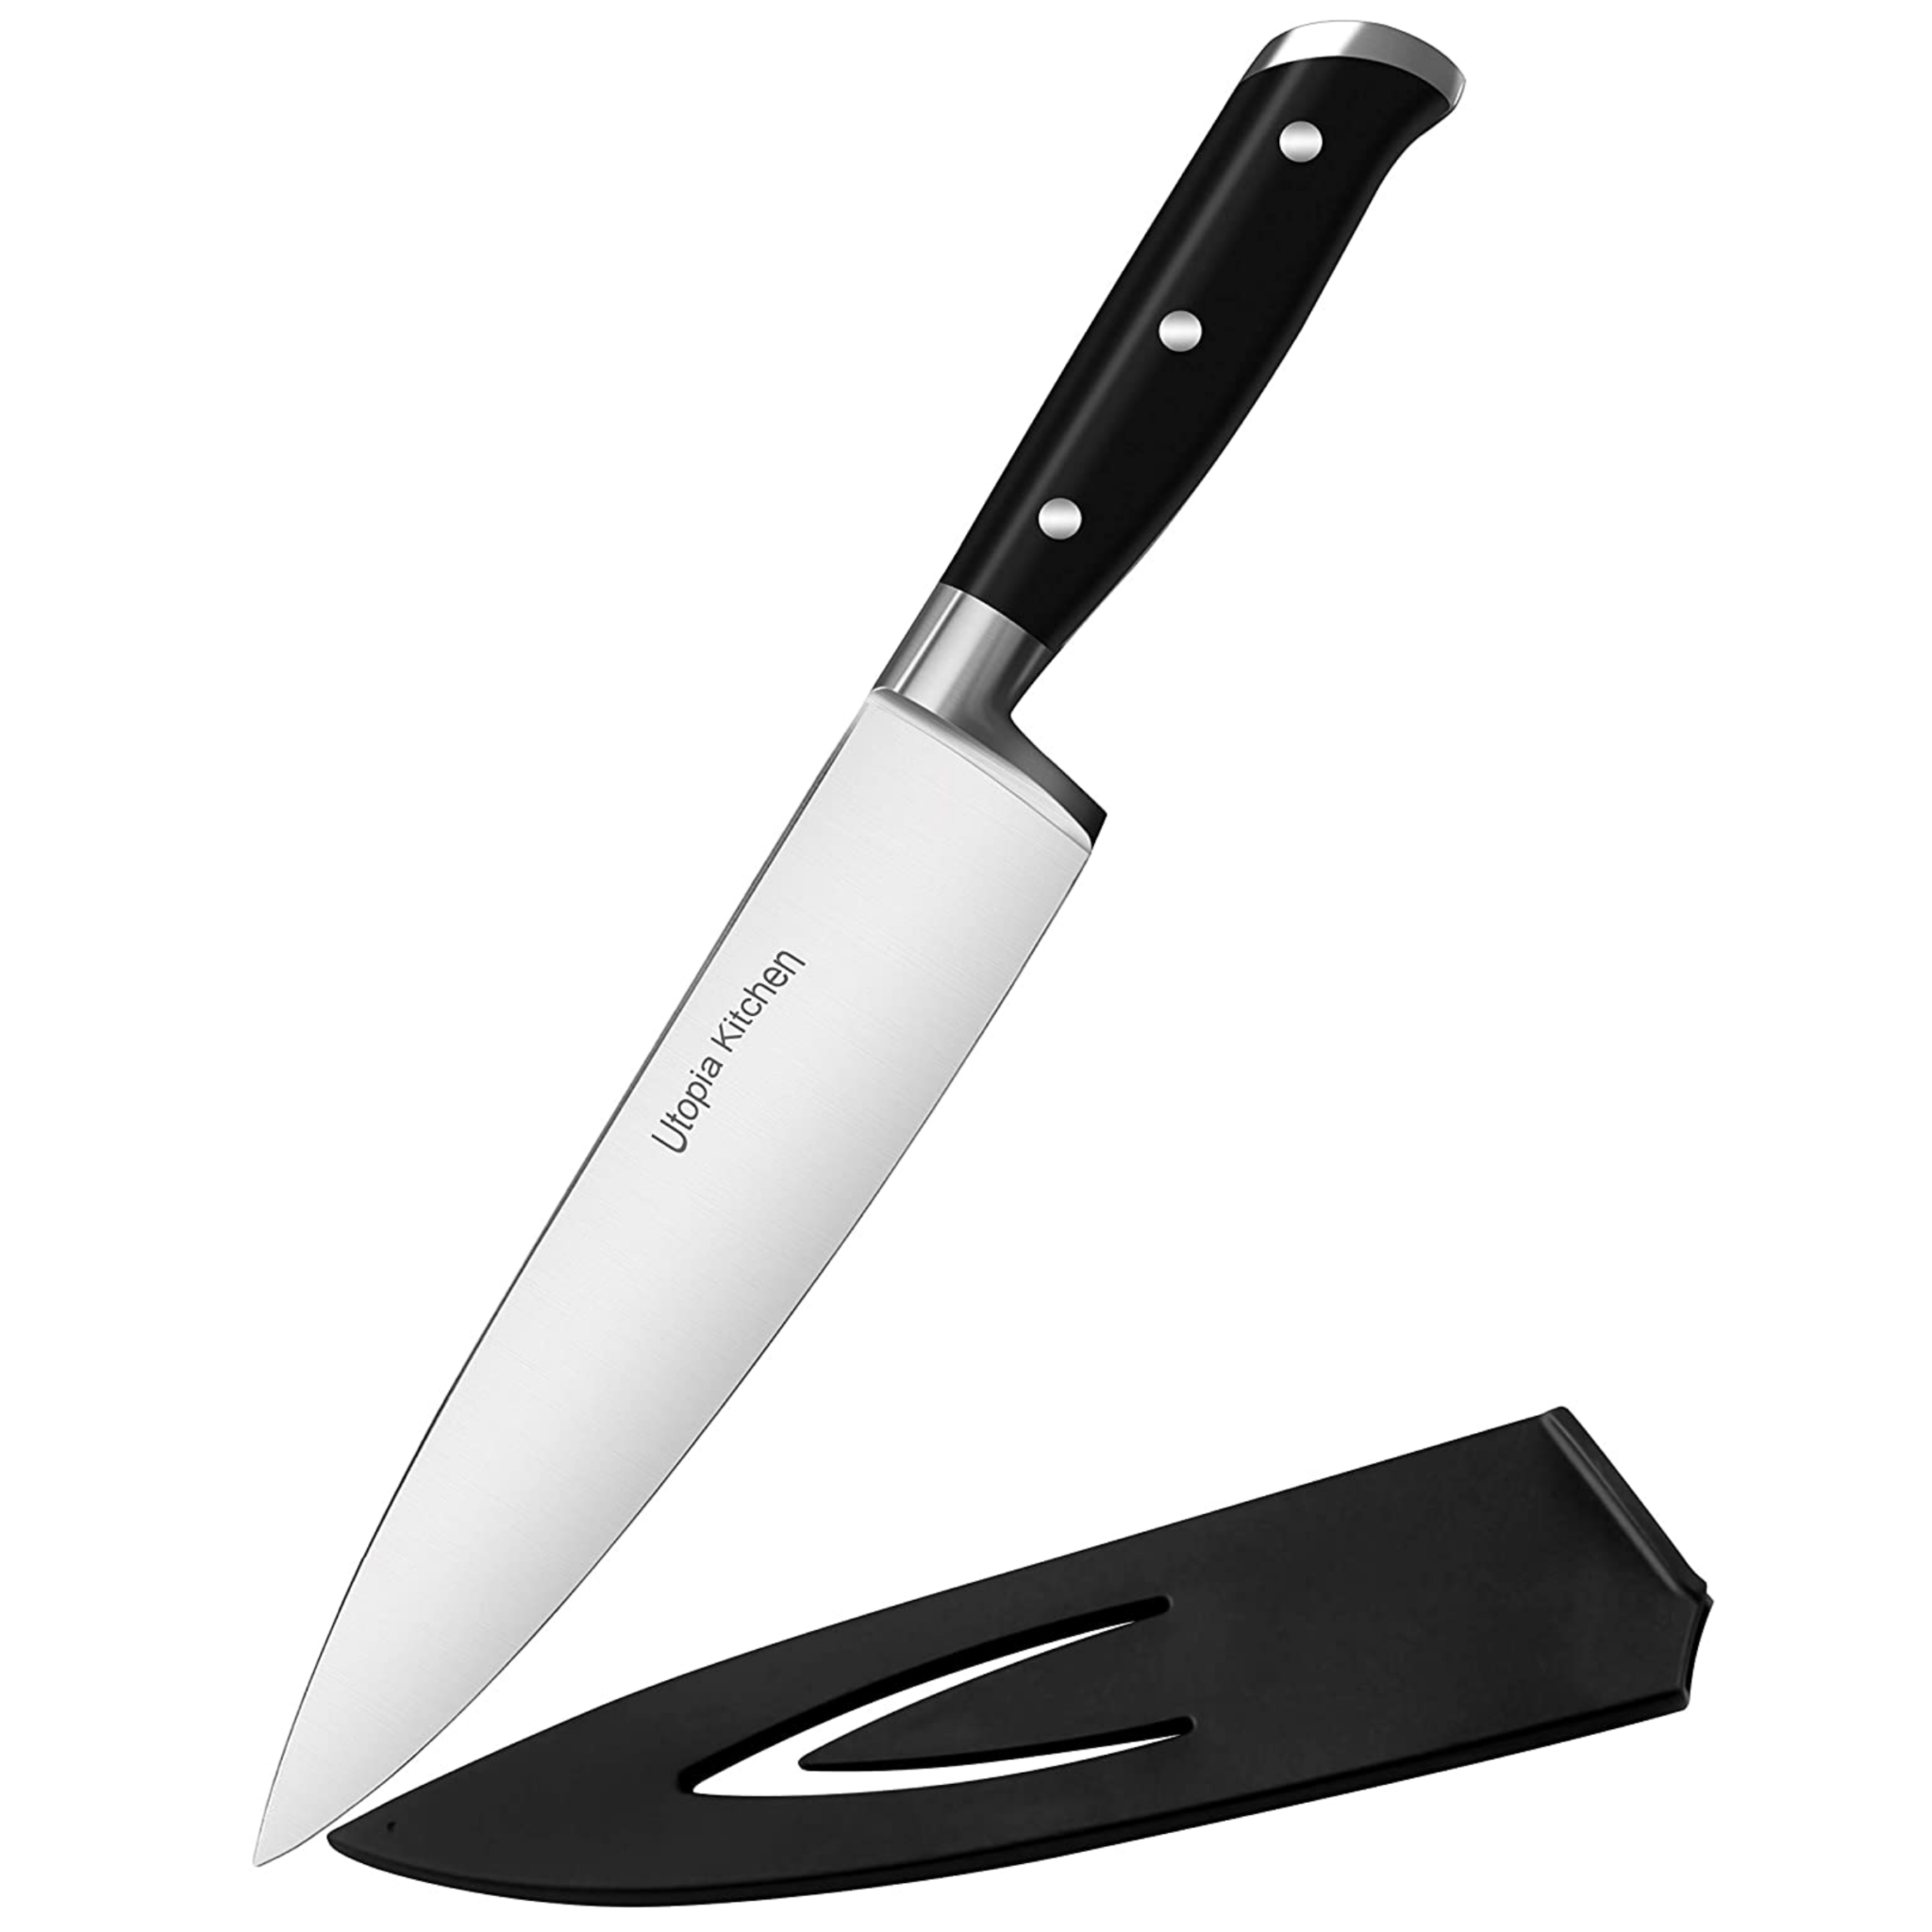 https://thecookworld.com/wp-content/uploads/2022/03/Utopia-Kitchen-Chef-Knife-1.png